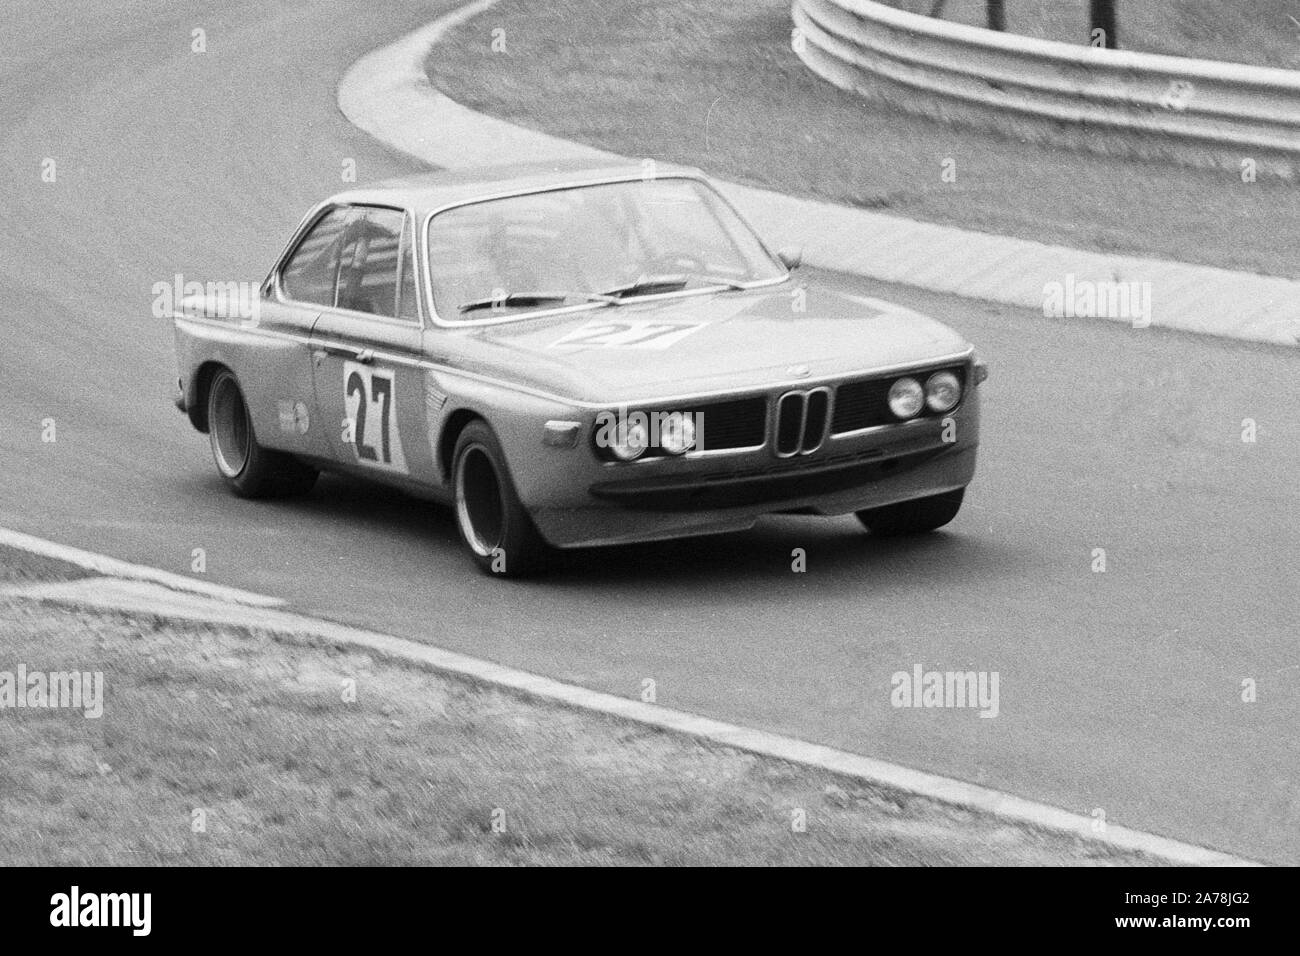 BMW 3.0 CSL during 1970s Touring Car Race at the Nuerburgring, Germany Stock Photo